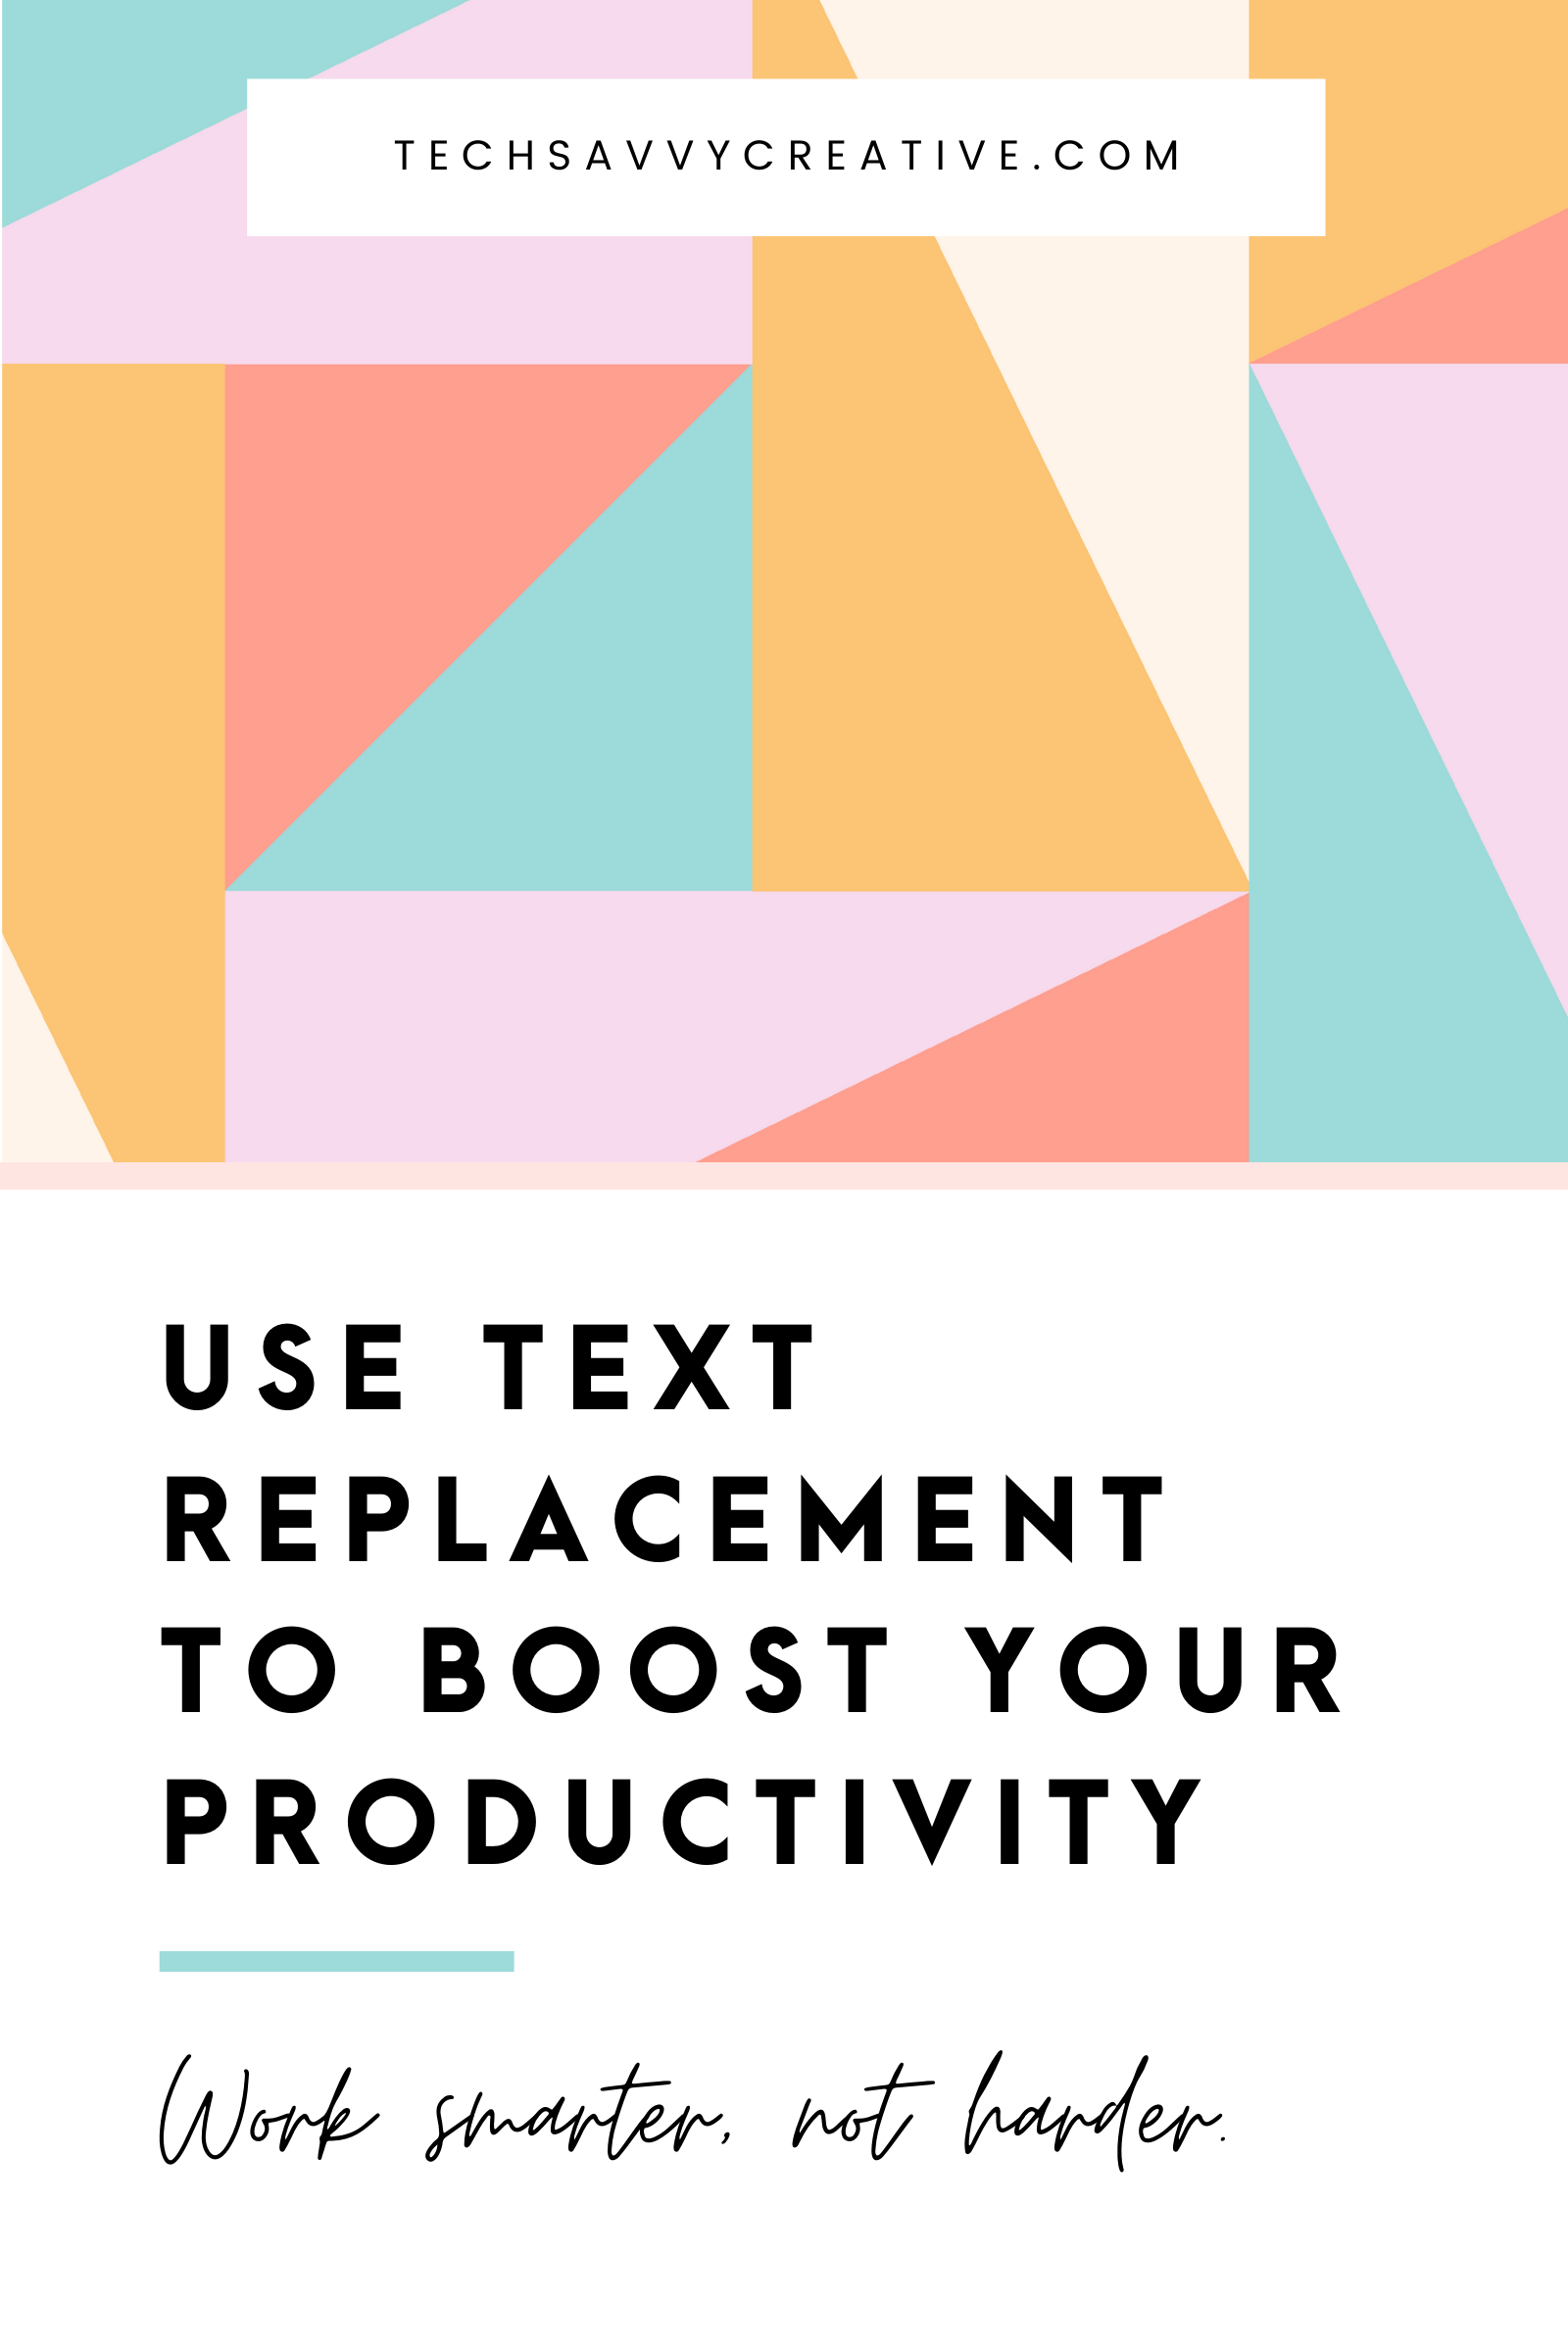 Learn How to use Text Replacement to boost your productivity with the help of Tech Savvy Creative